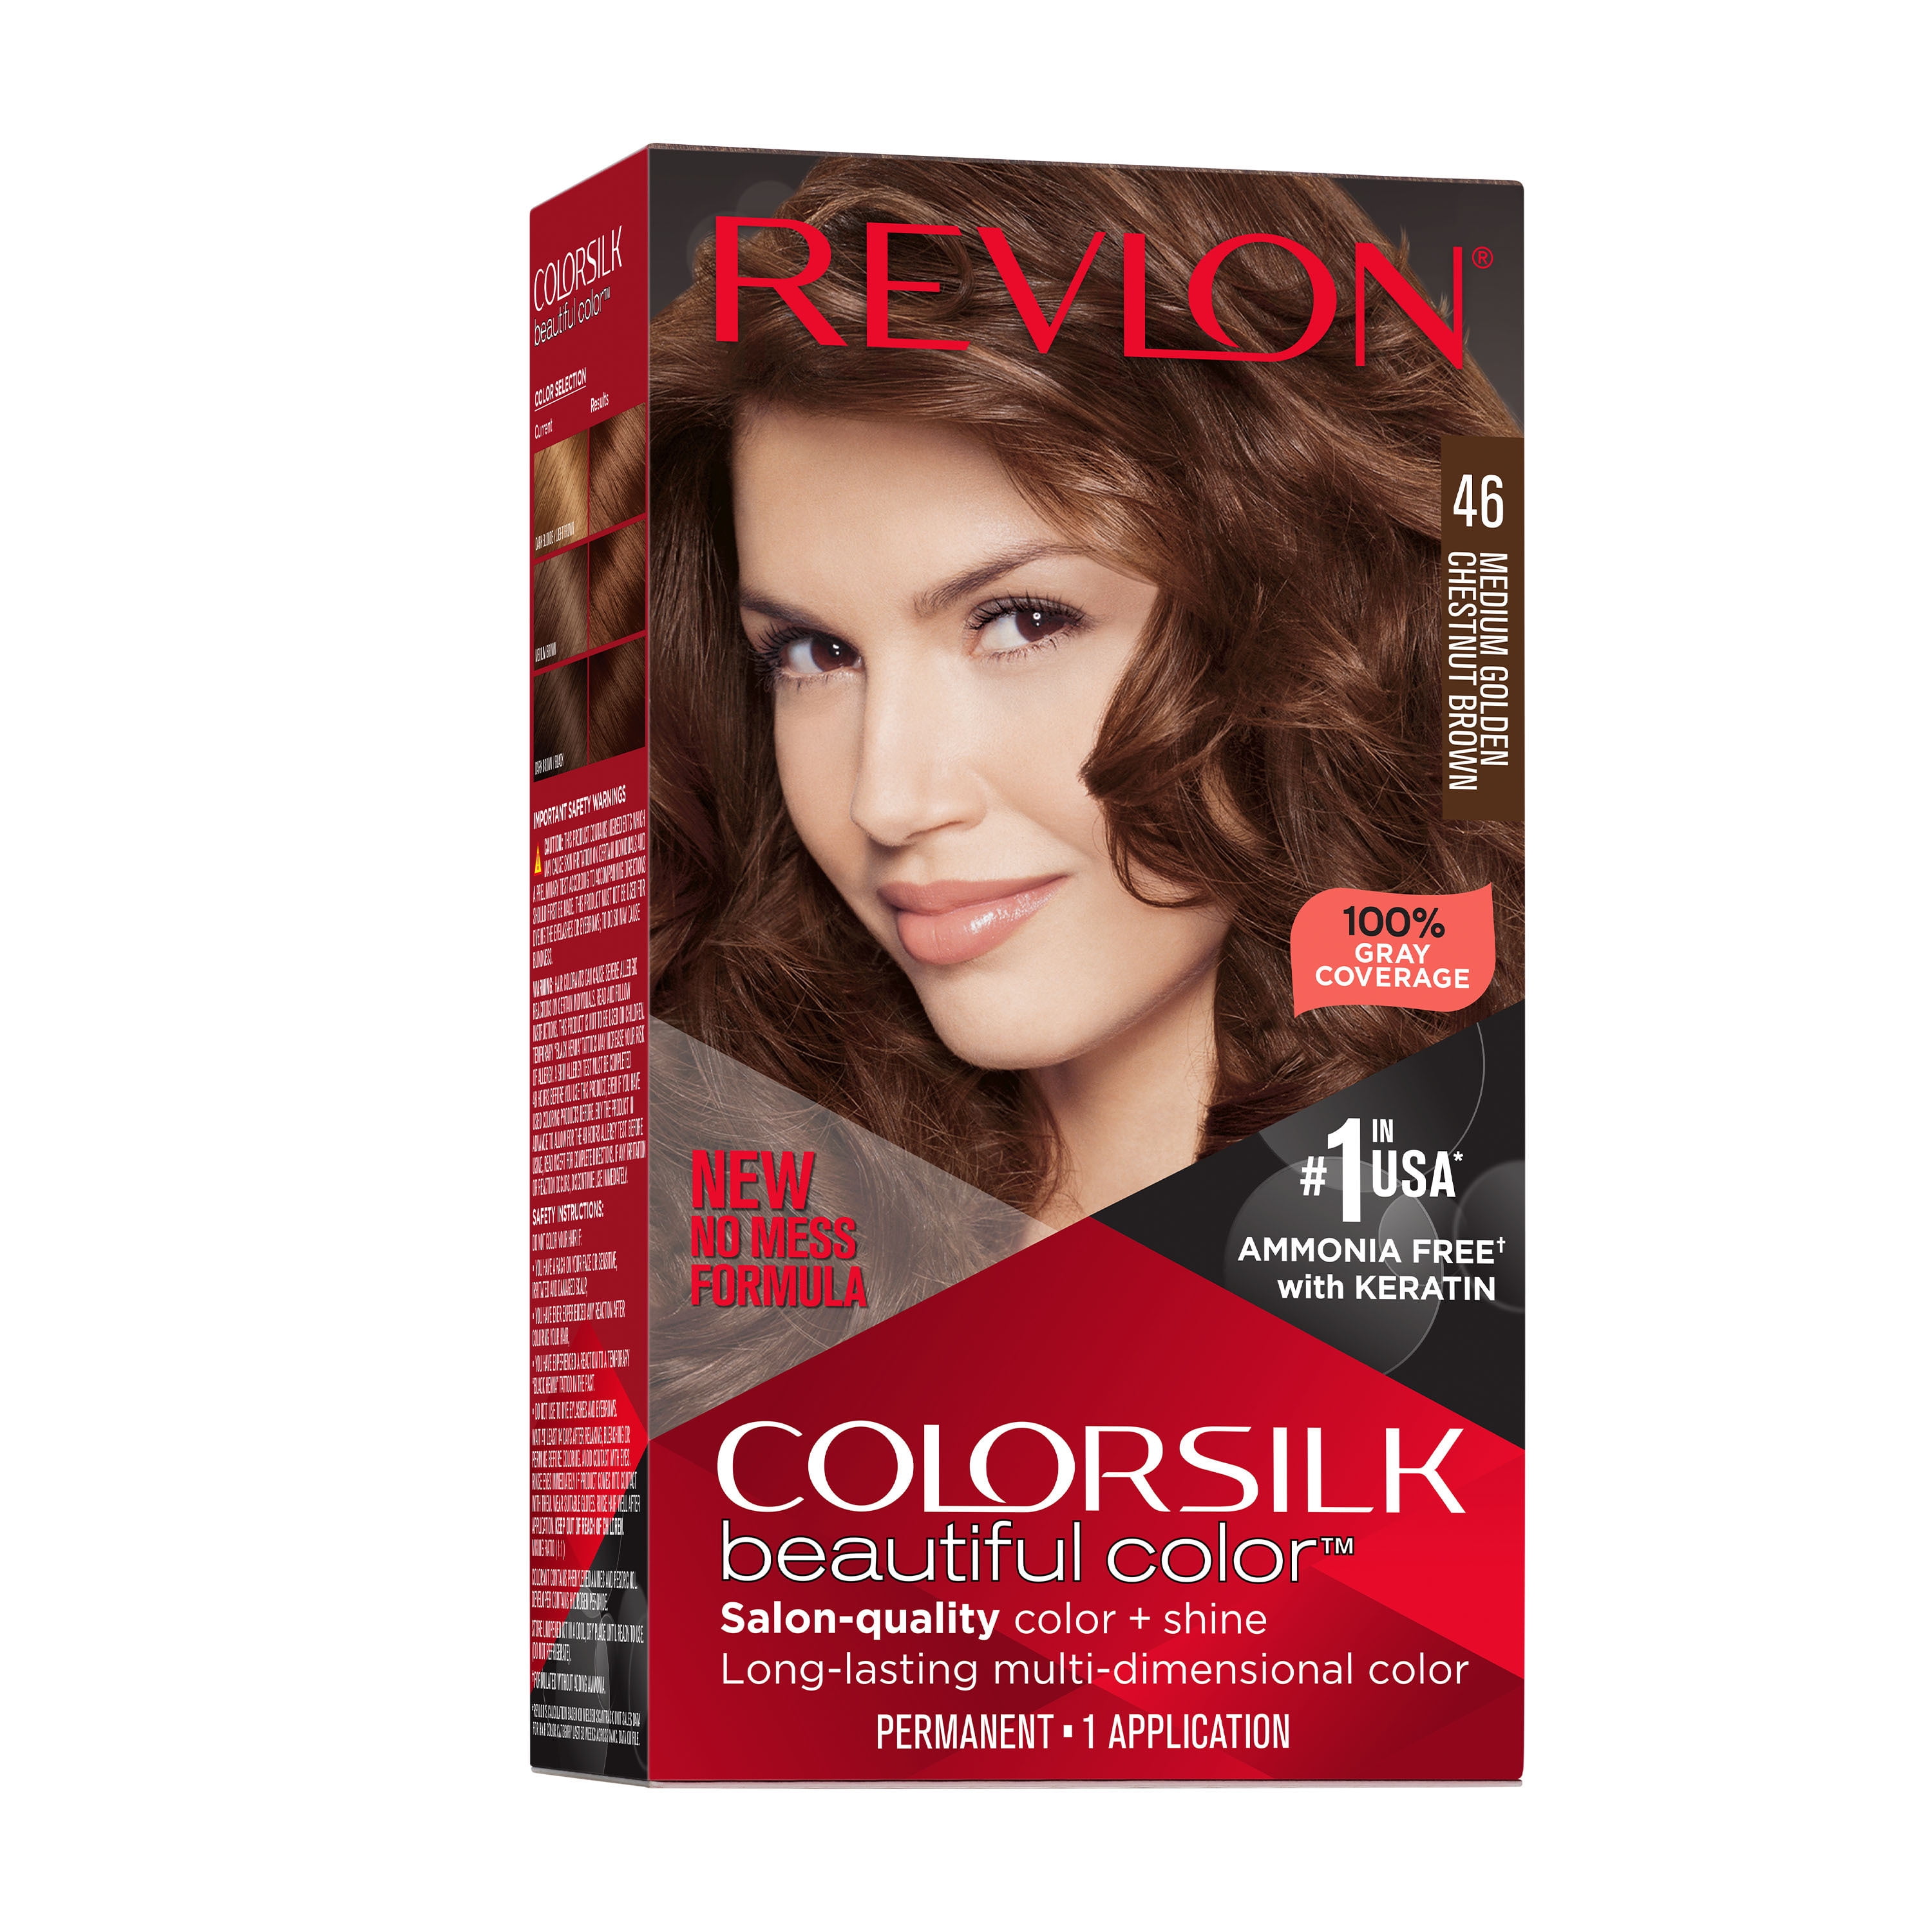 Revlon Colorsilk Beautiful Color Permanent Hair Color, Long-Lasting High-Definition Color, Shine & Silky Softness with 100% Gray Coverage, Ammonia Free, 046 Medium Golden Chestnut Brown, 1 Pack